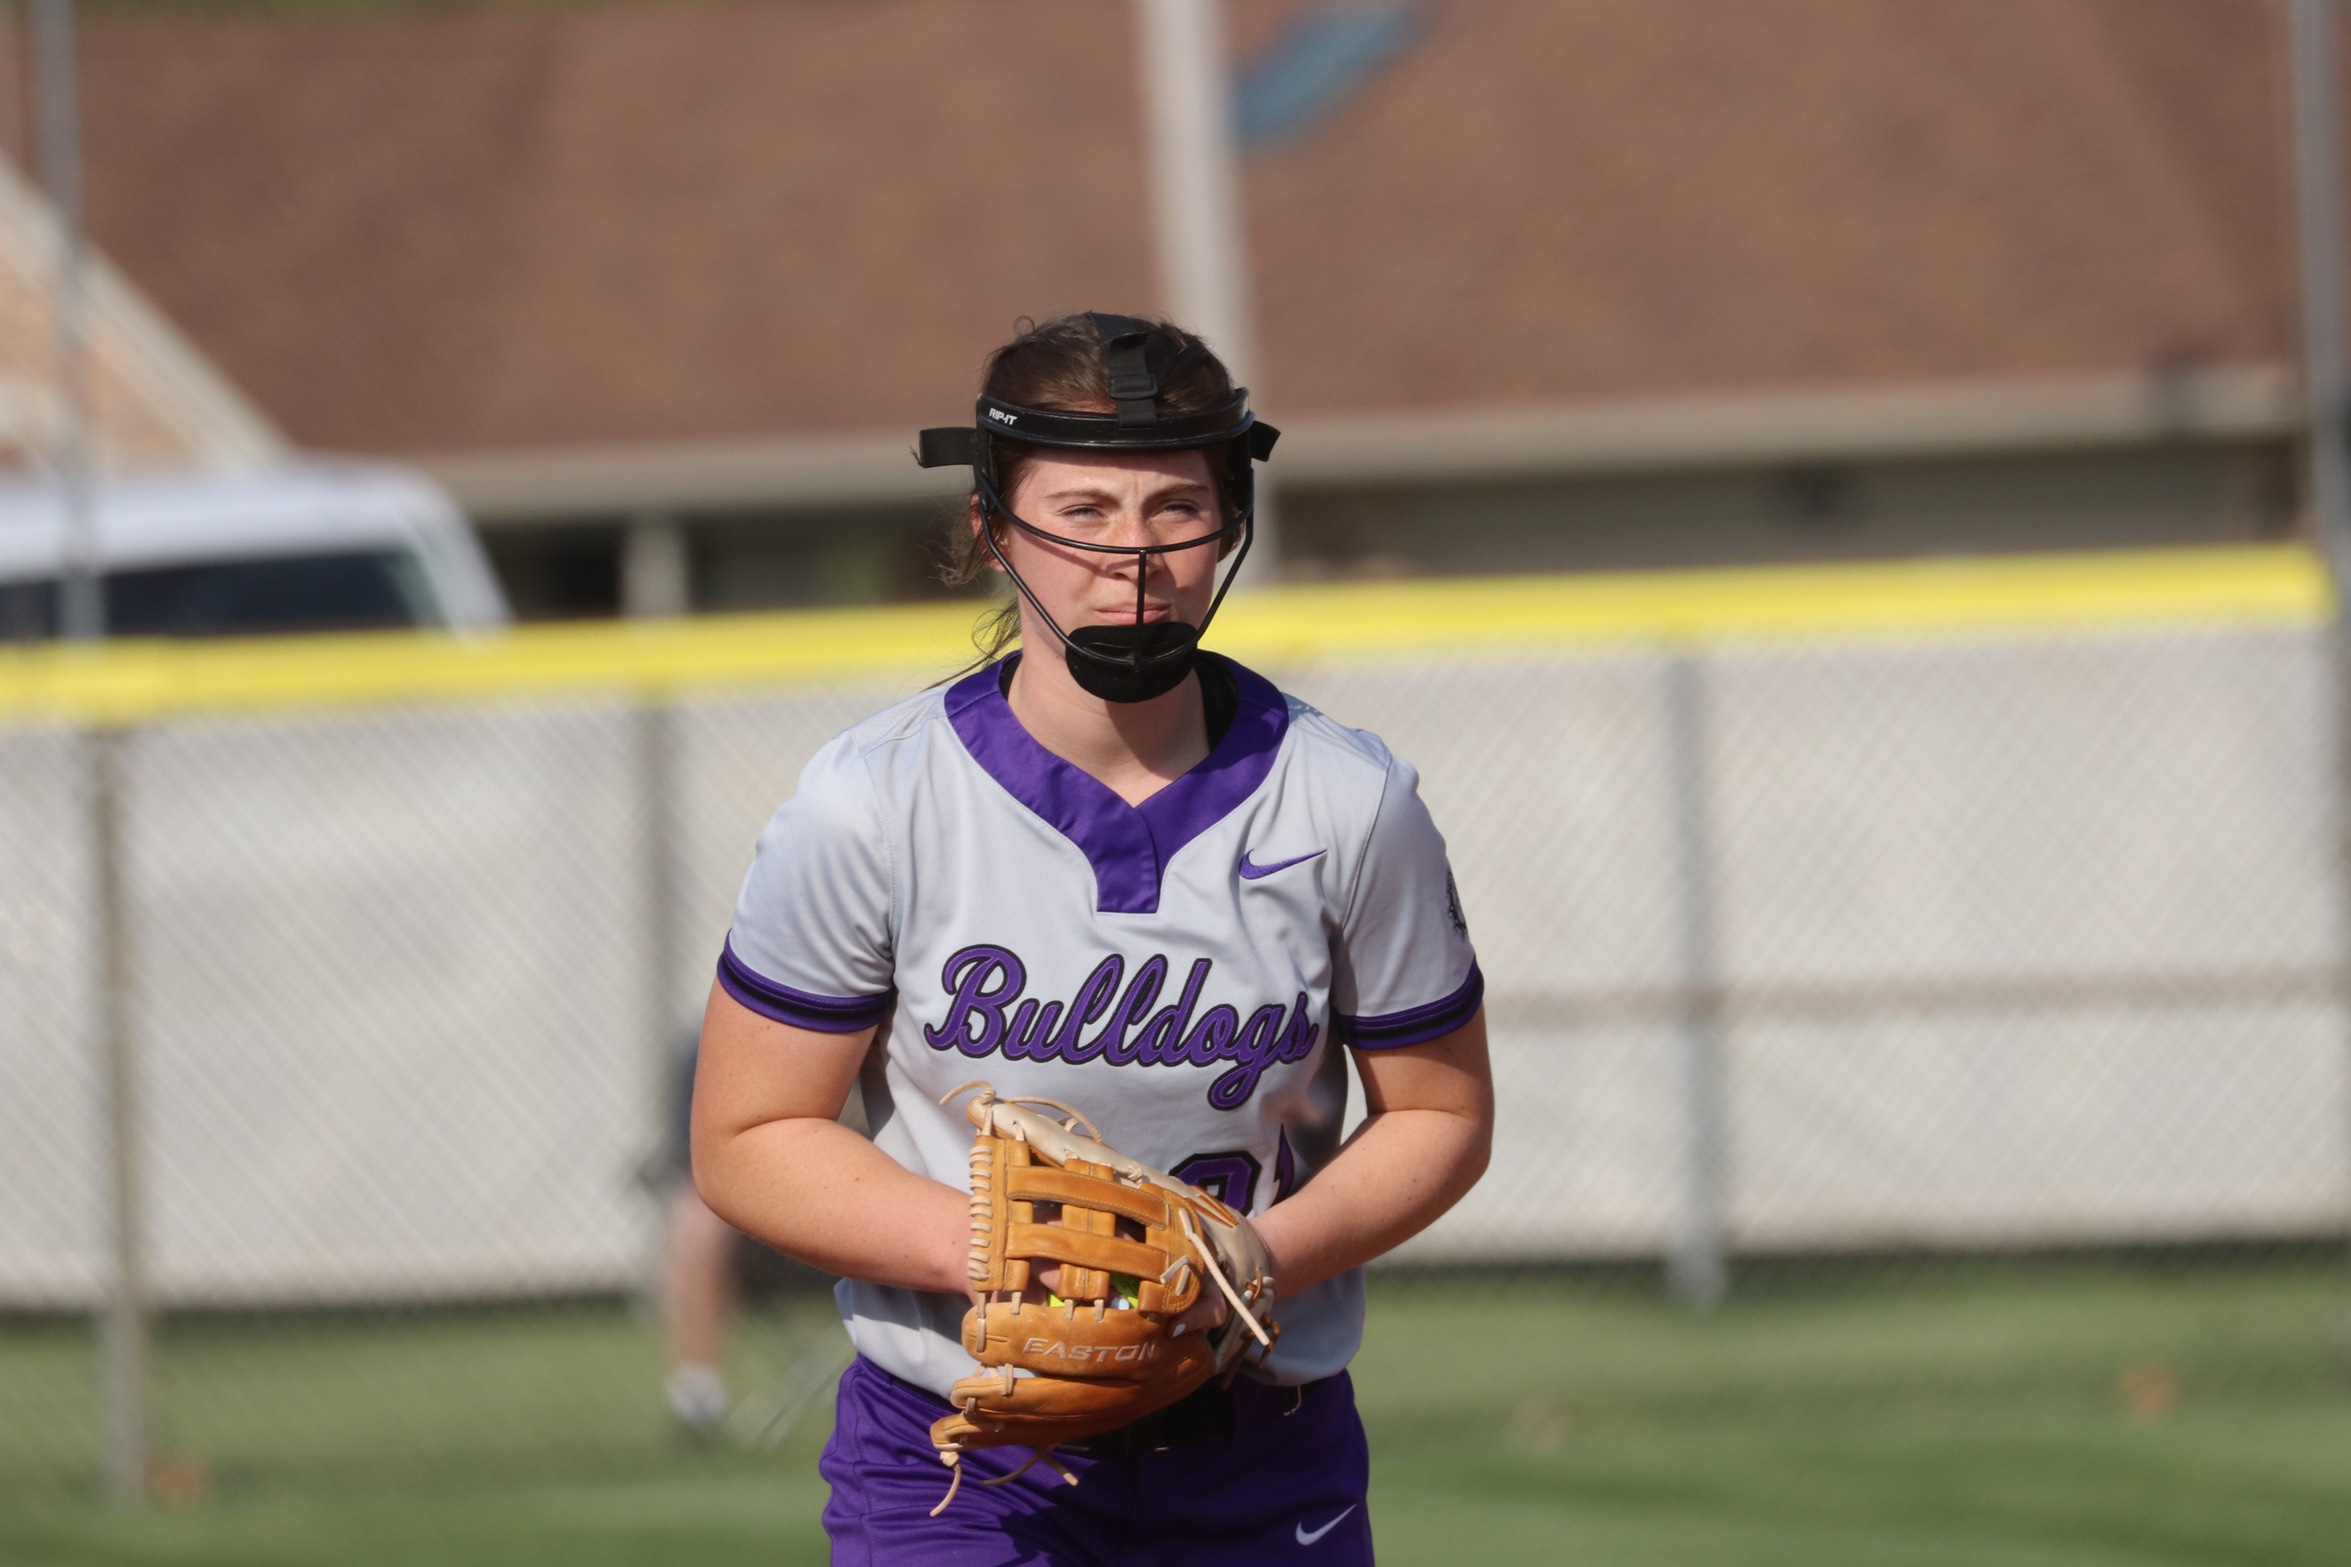 Endress fans 17, homers twice in No.10 Softball win over Zionsville